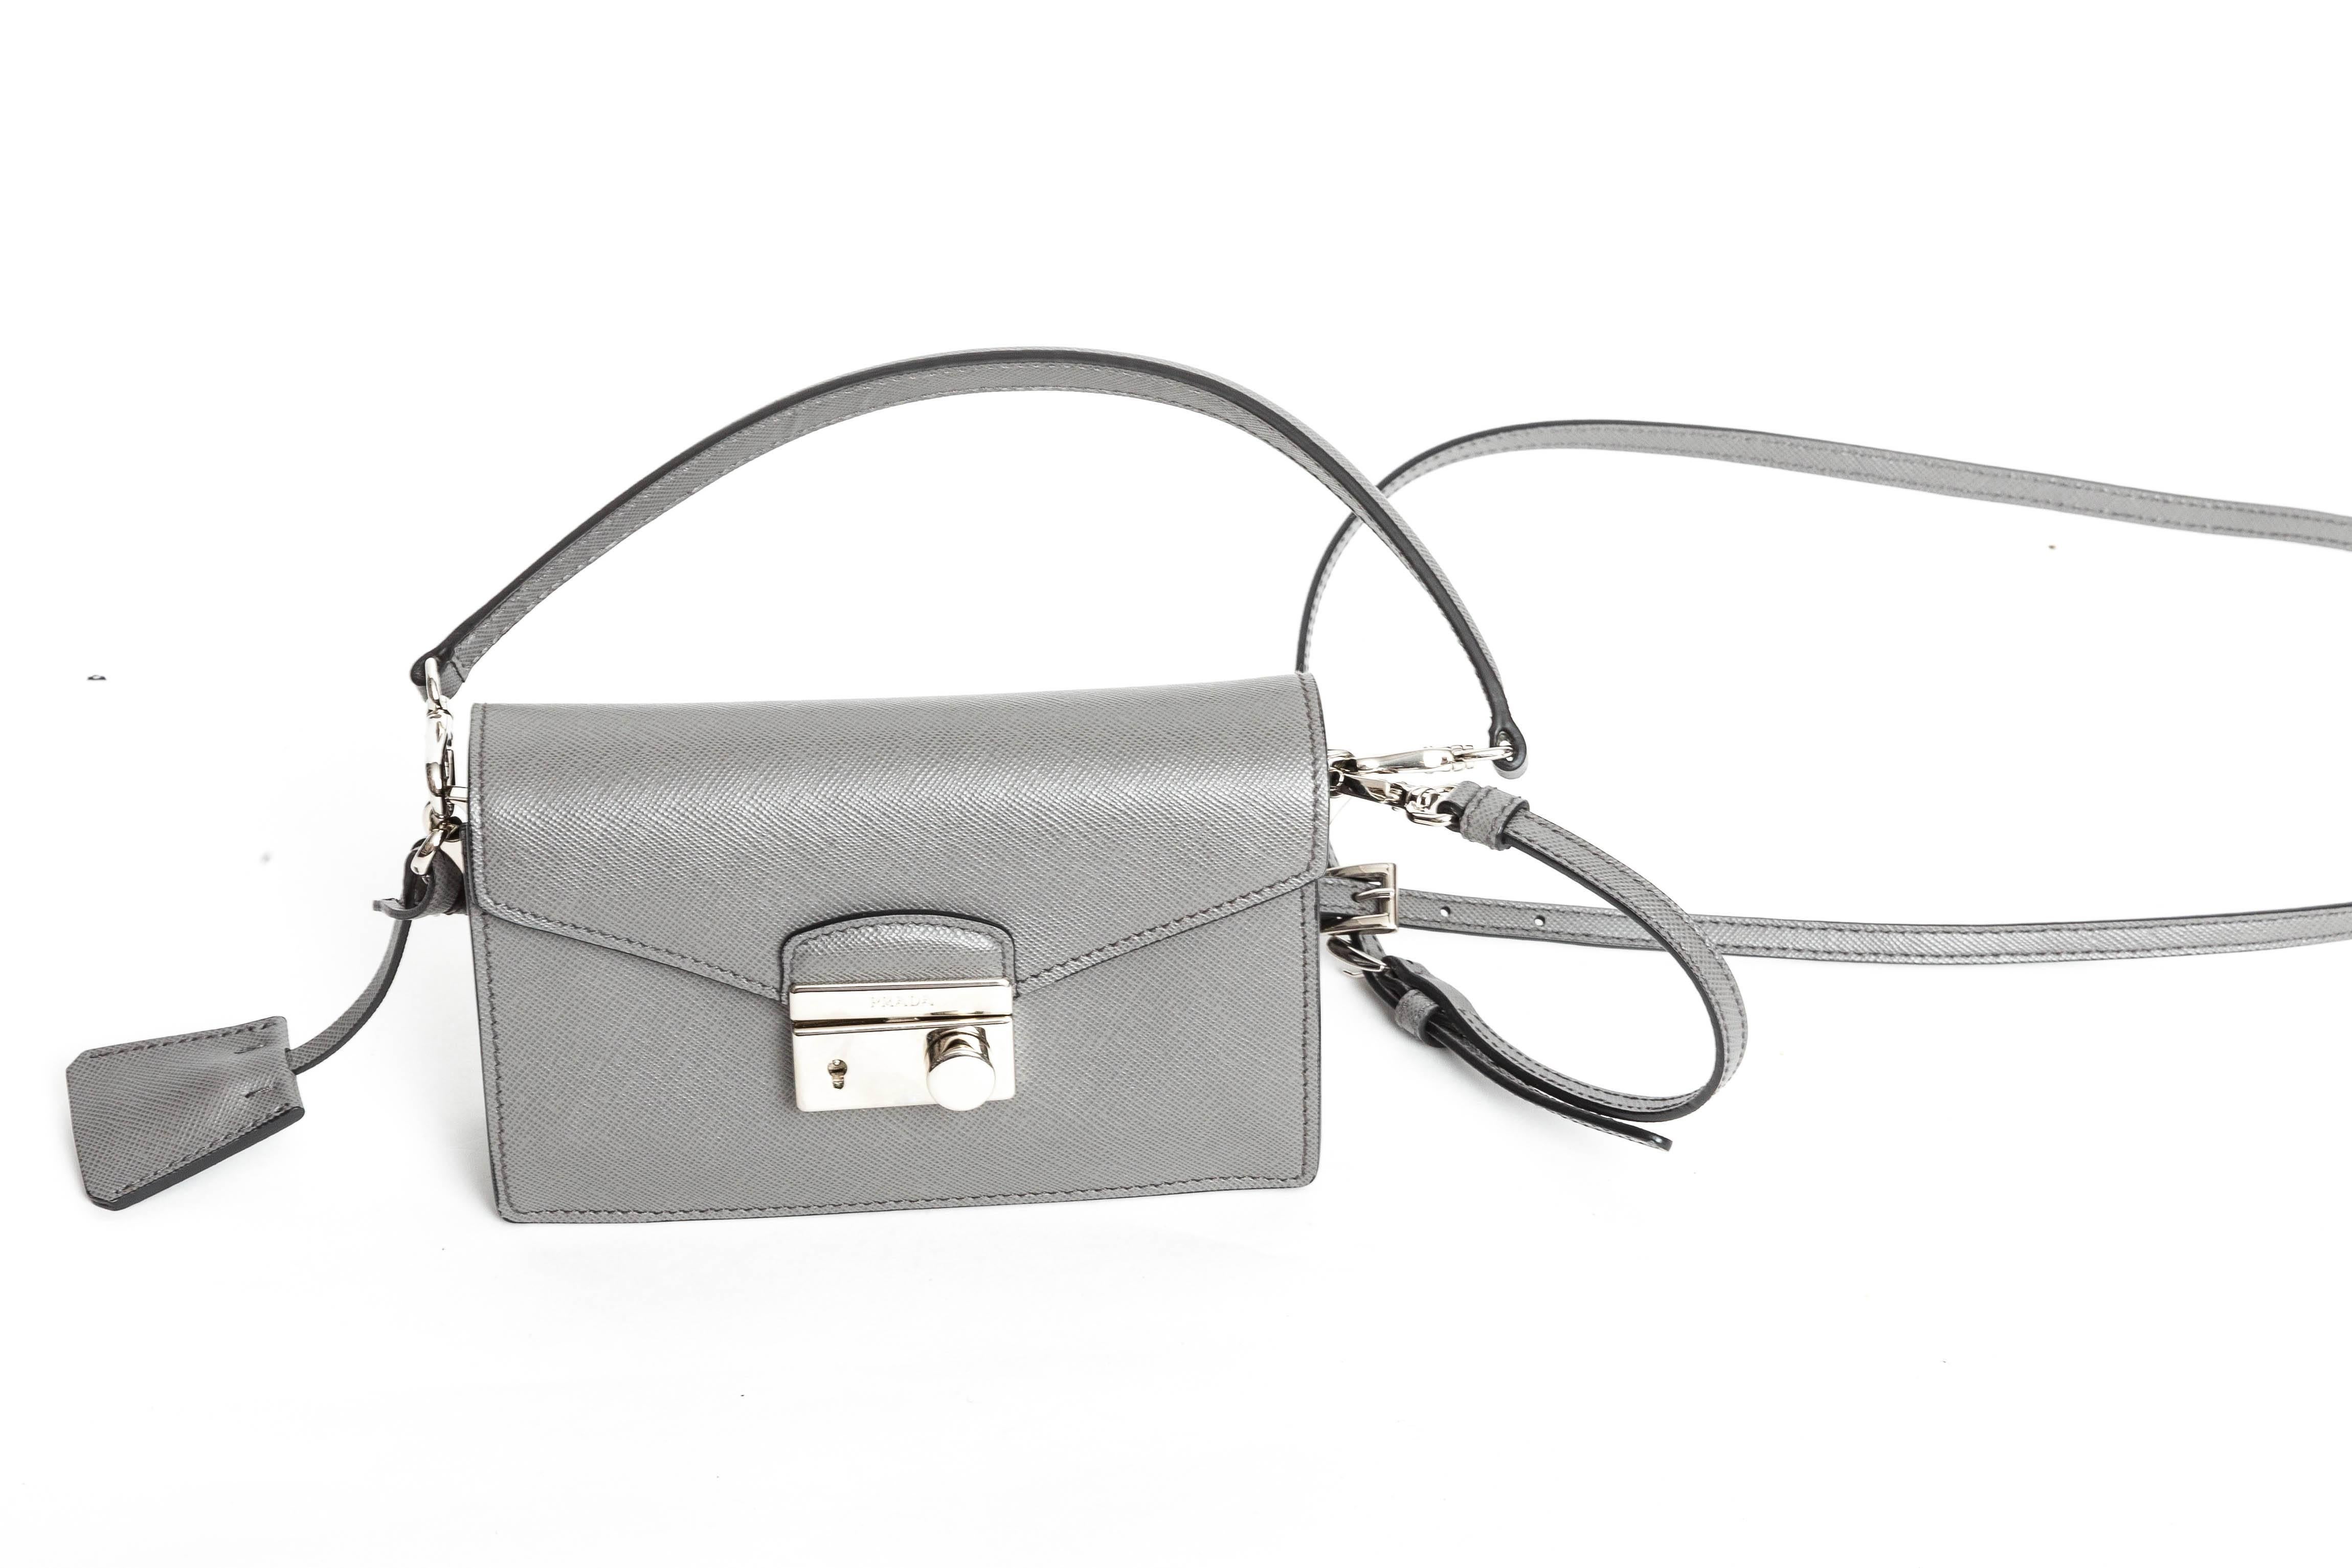 Wonderful Prada Gray Saffiano Crossbody Mini with Top Handle and Detachable Shoulder Strap
Condition is excellent.
Dust bag is included.

